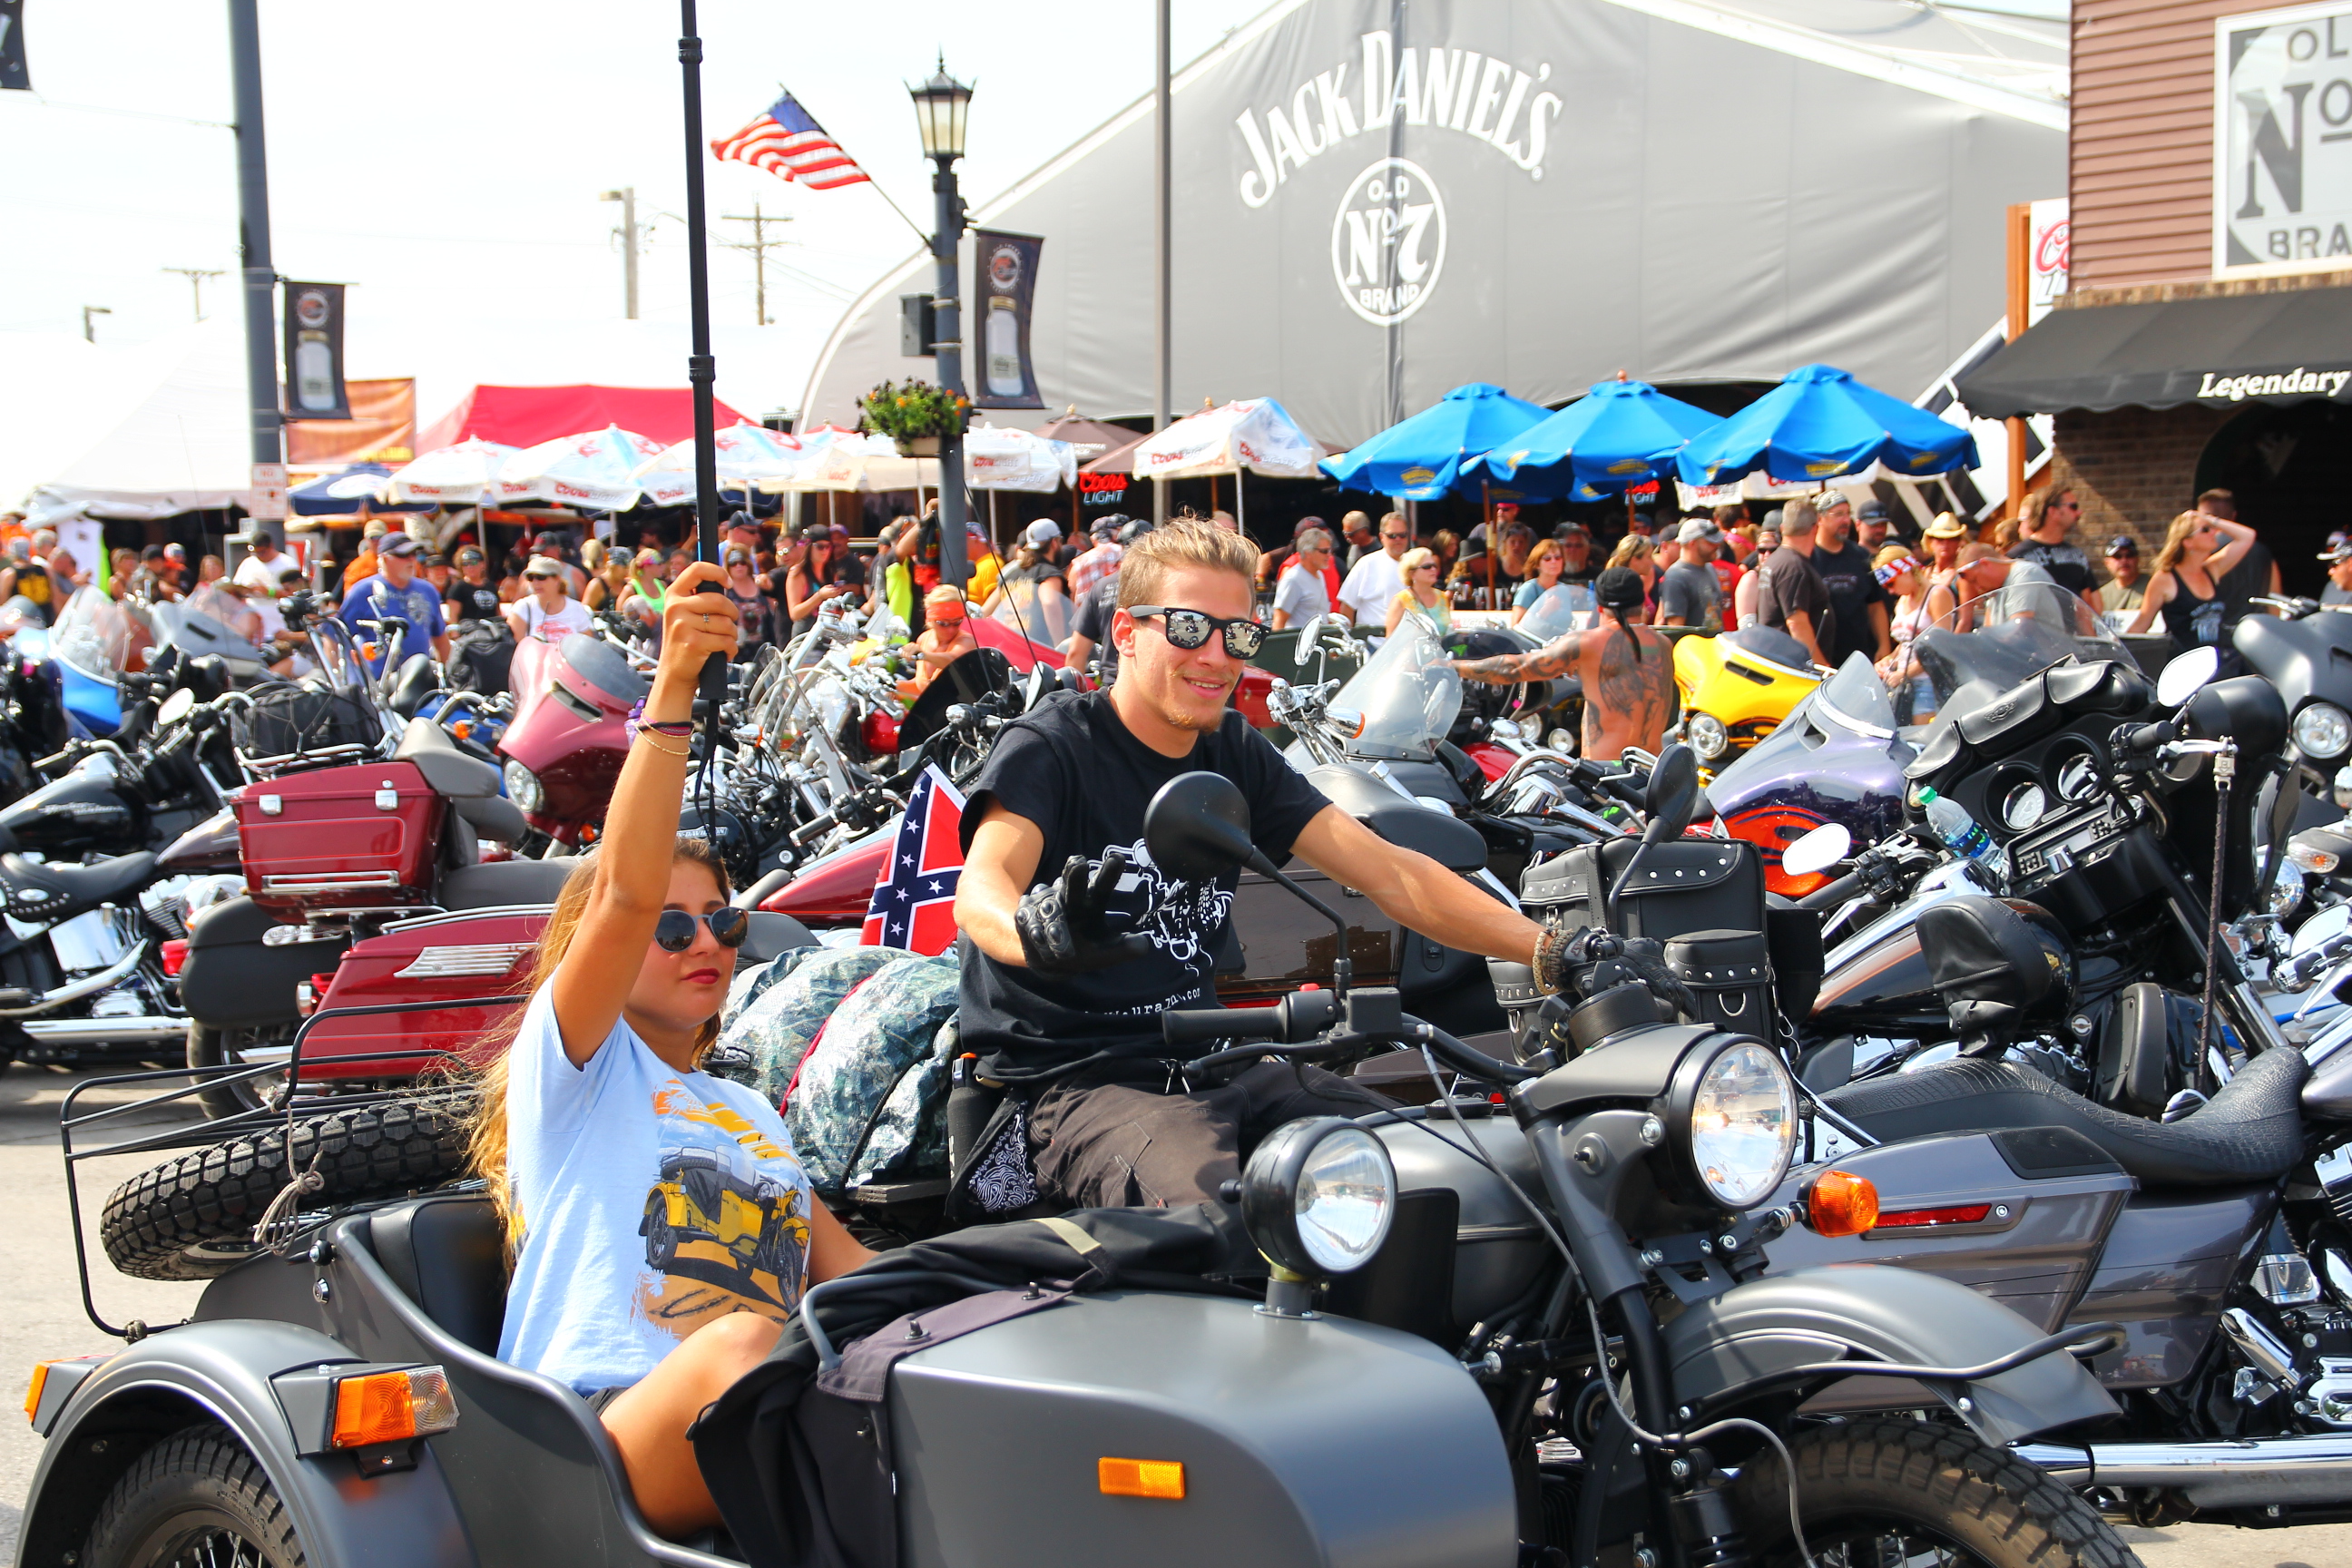 See photos of the 2009 sturgis motorcycle rally in sturgis, south dakota